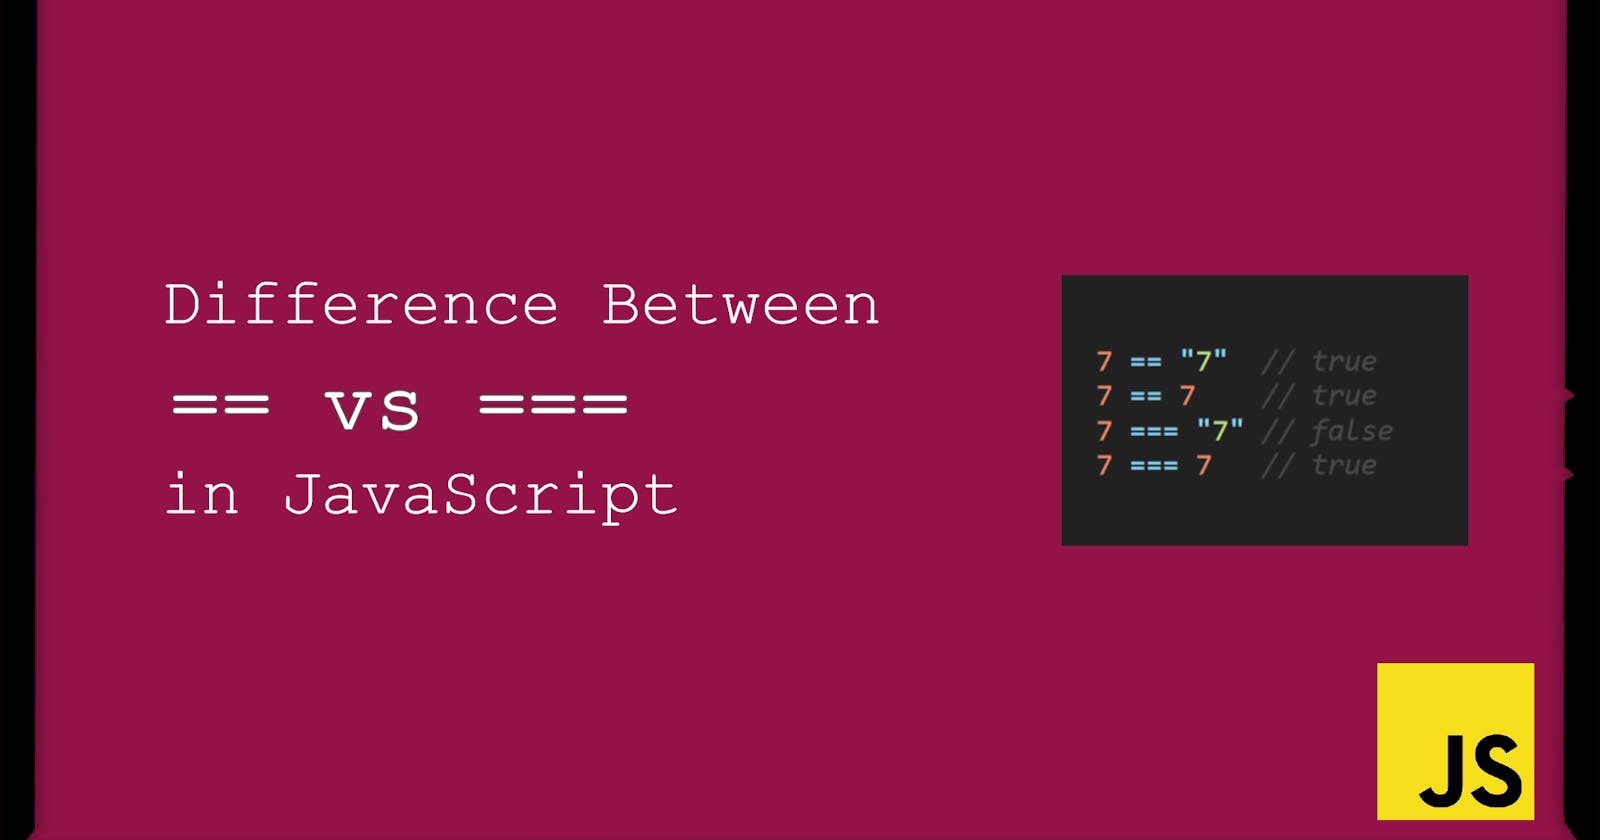 Difference Between "==" and "===" in javaScript